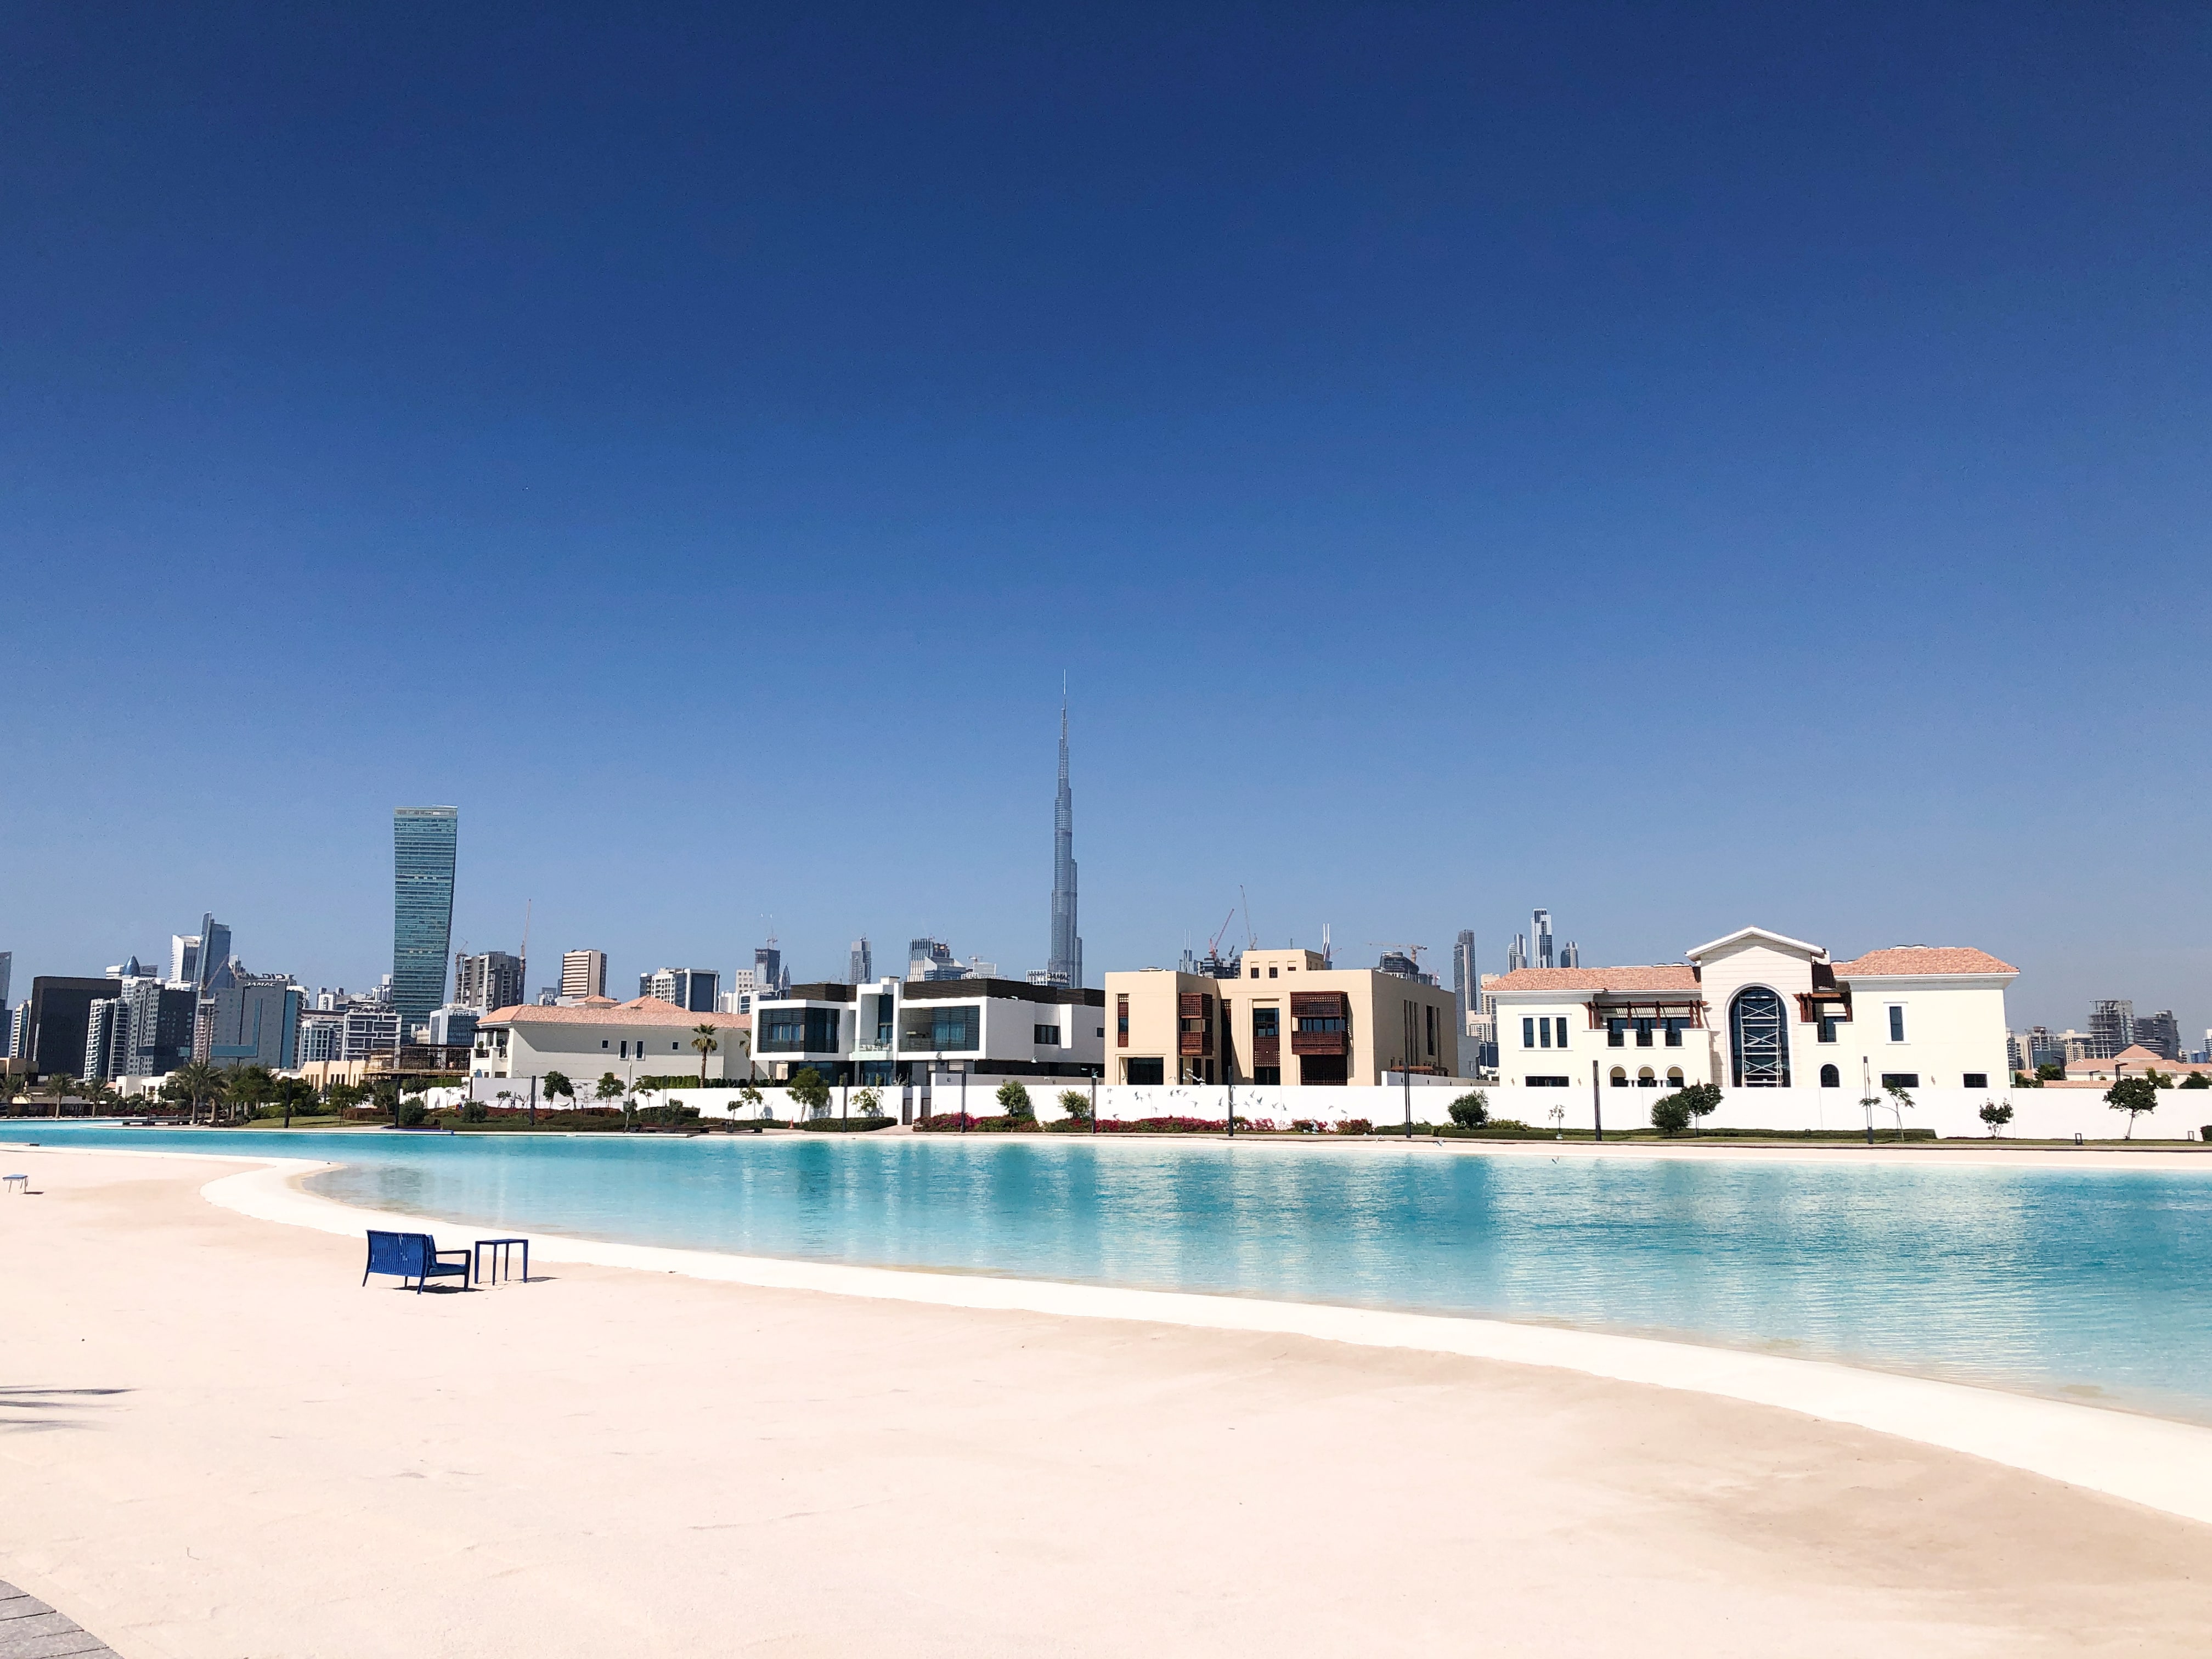 Villa rental rates in Dubai and Abu Dhabi are very strong